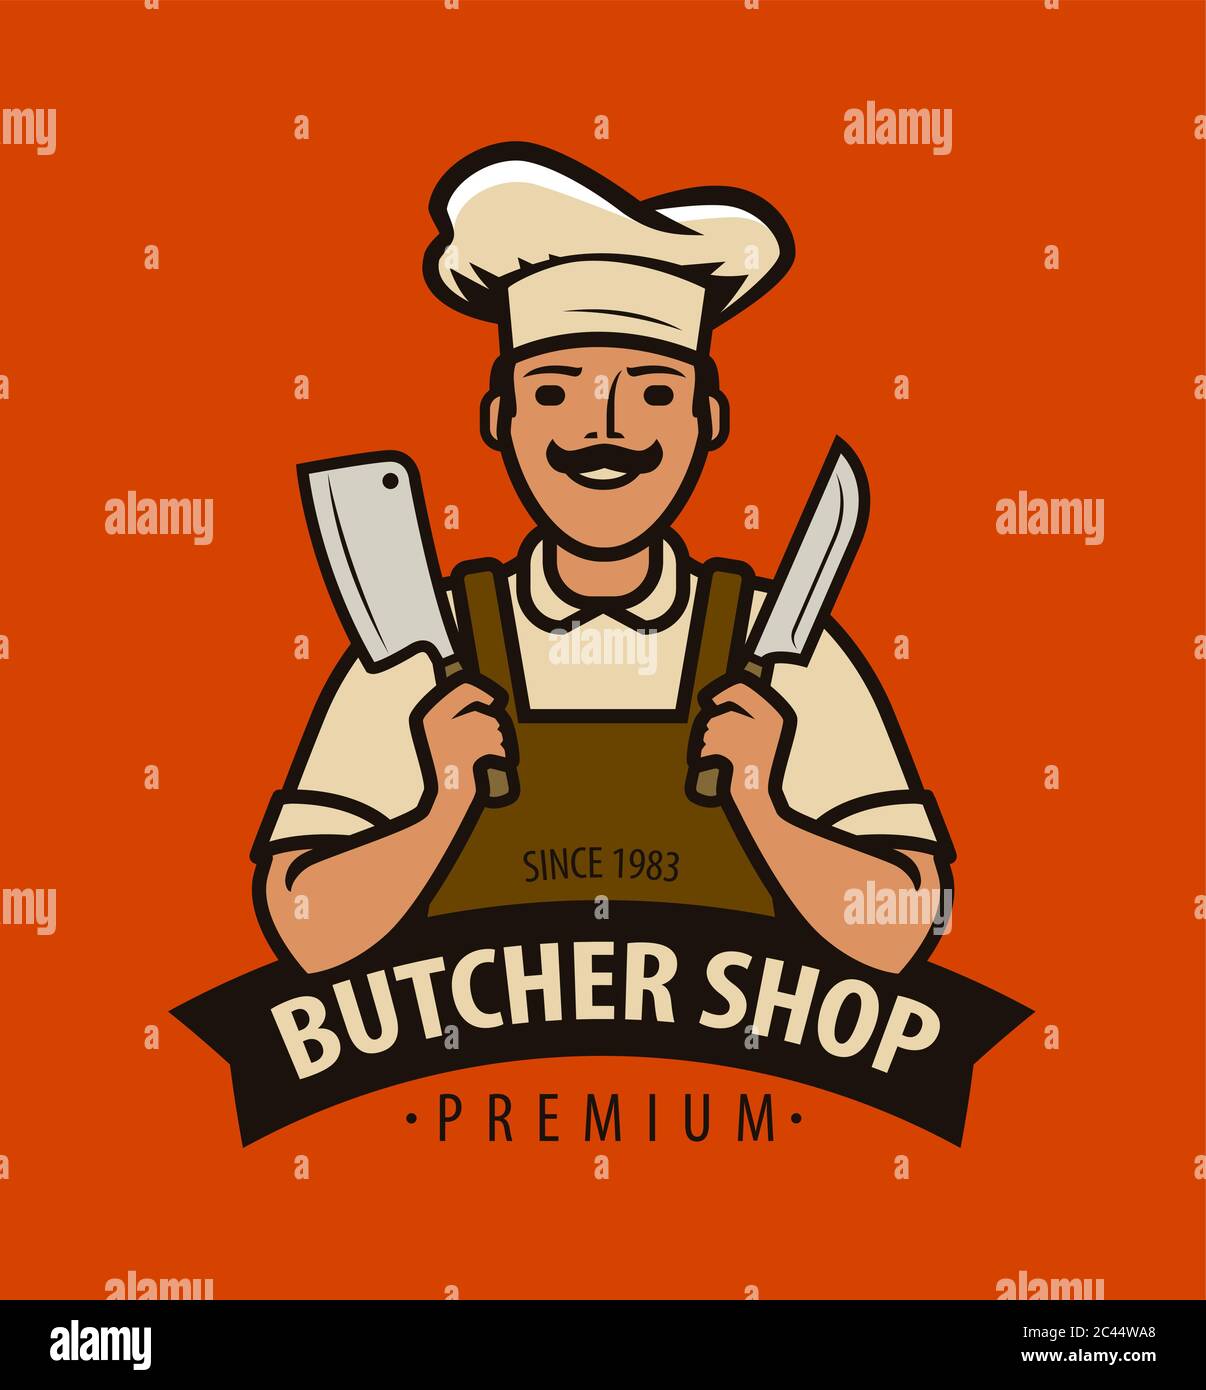 Butcher shop logo or label. Chef with kitchen knives vector illustration Stock Vector